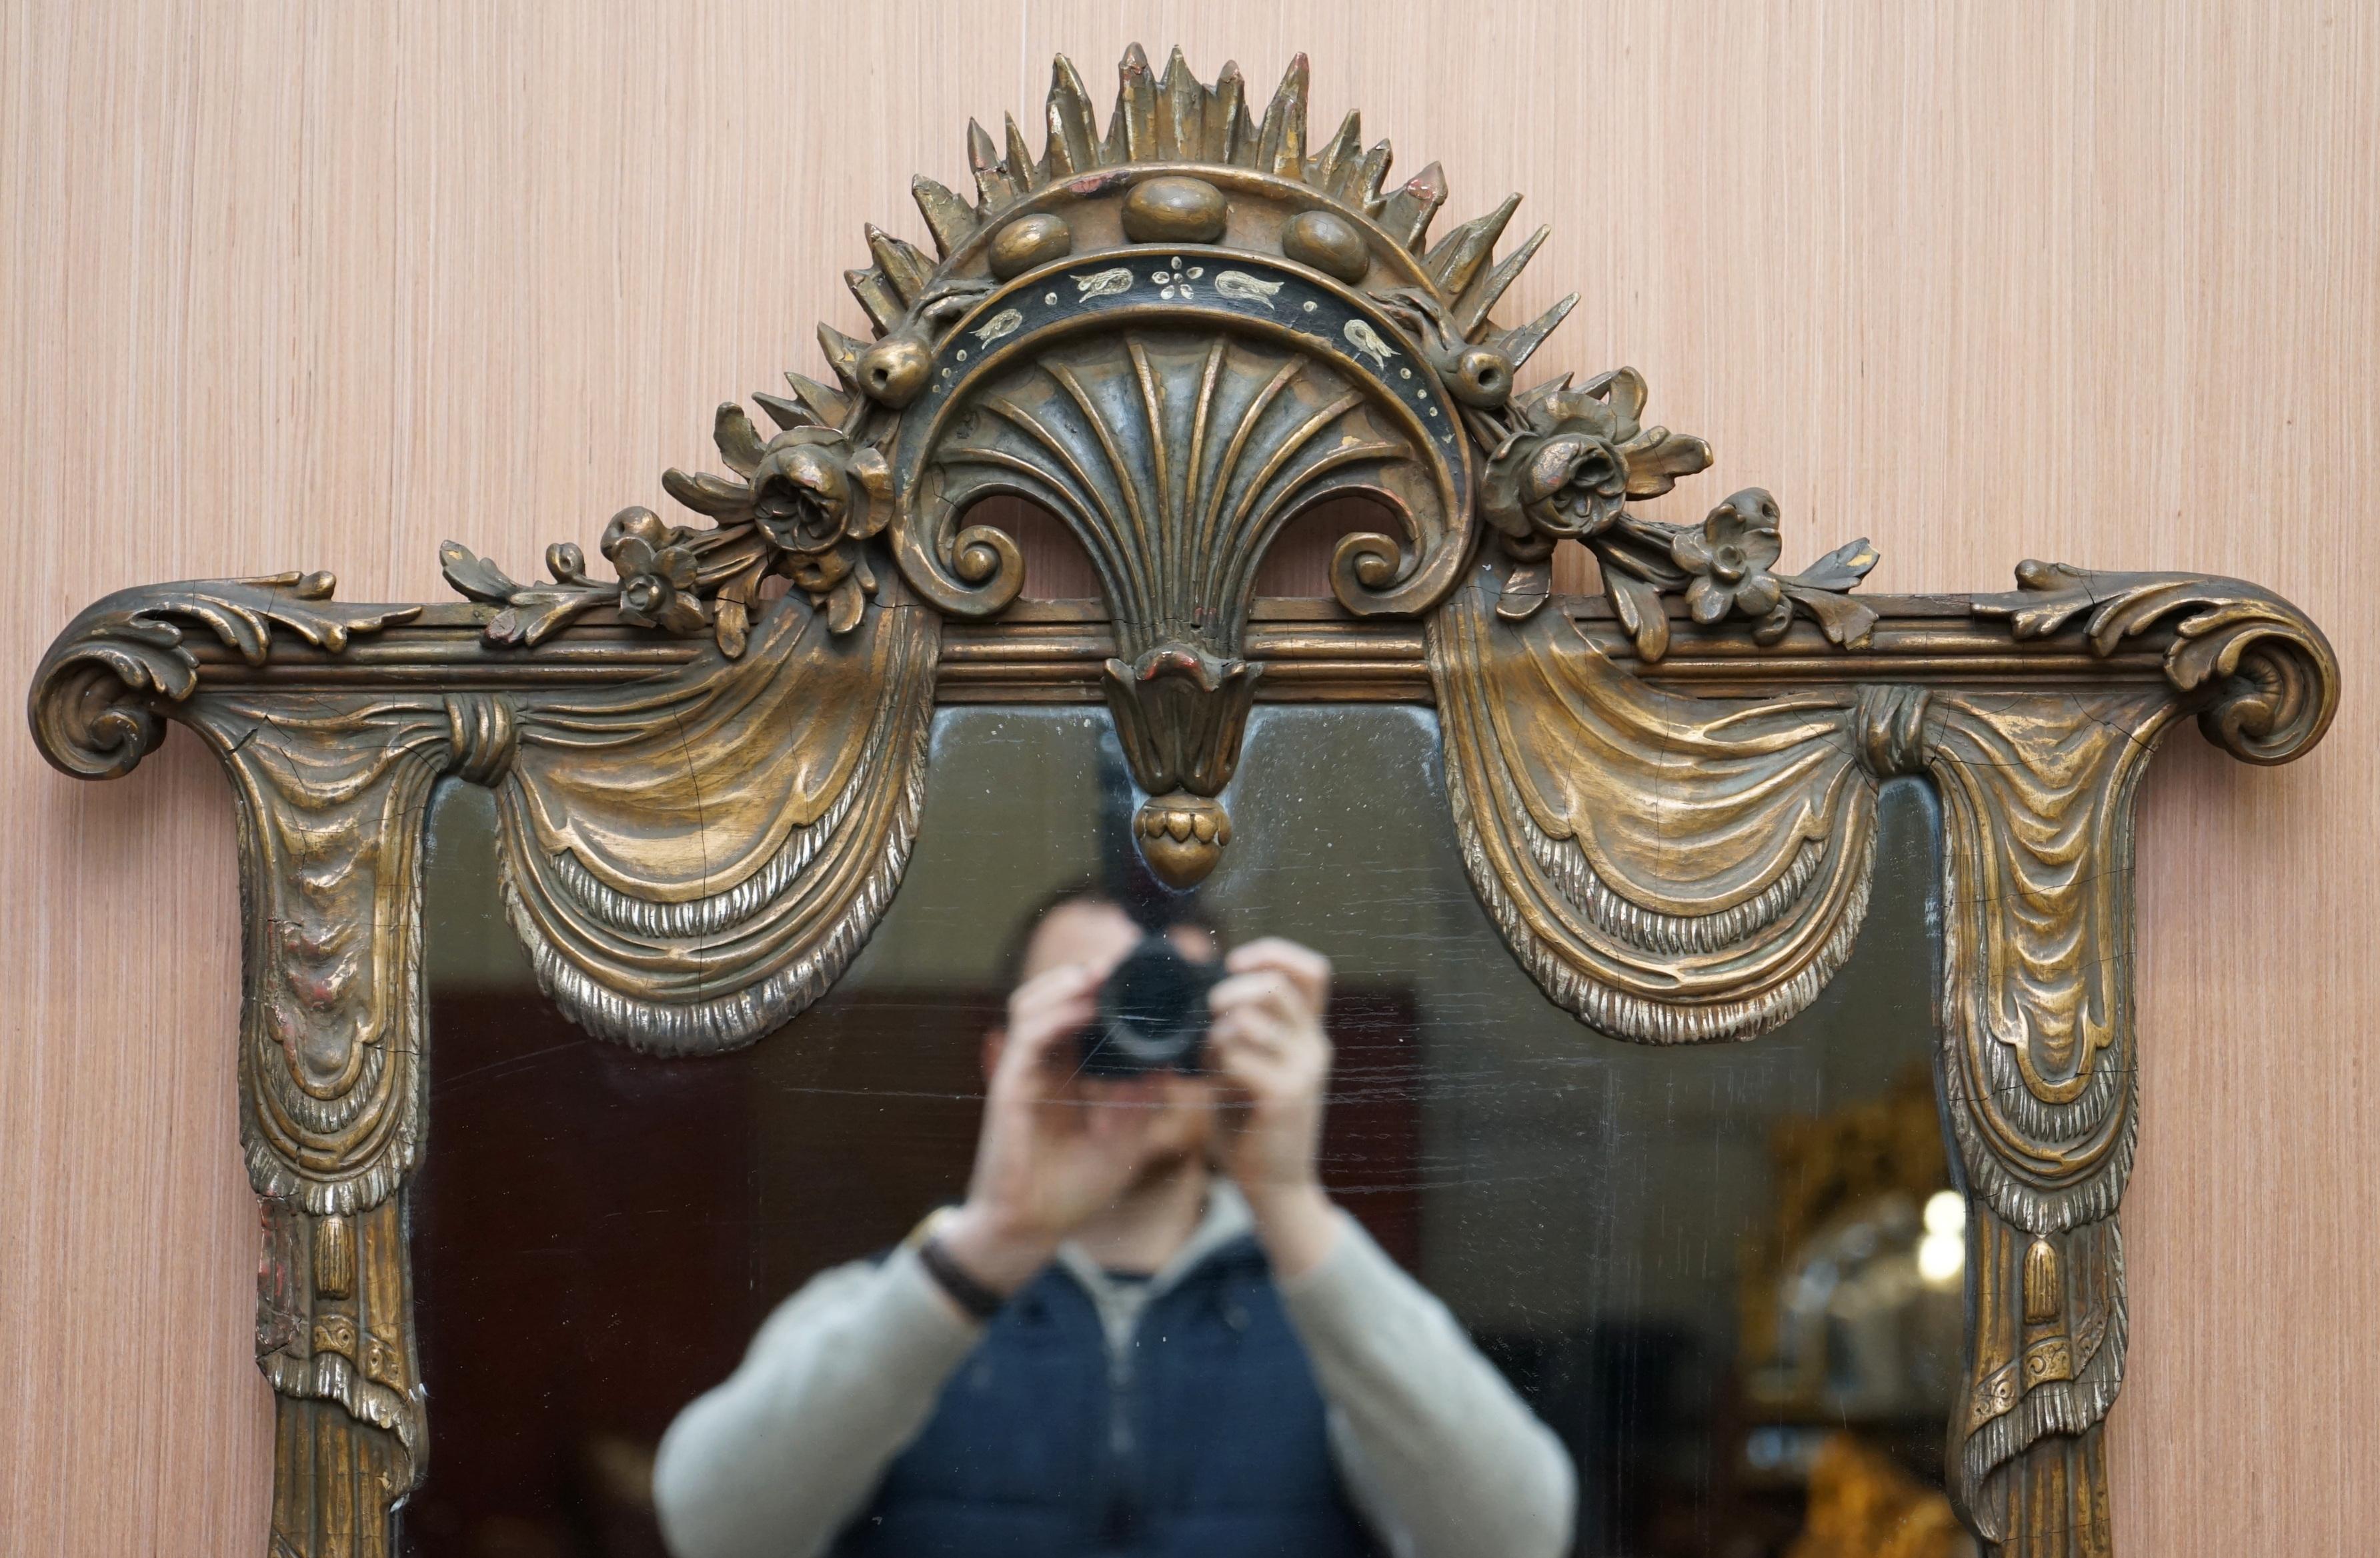 We are delighted to offer for sale this lovely late 19th century French oversized shield wall mirror with hand carved acanthus leaf and floral scrolling detail

A very high end original 19th century mirror, a rare shape and with lots of ornate